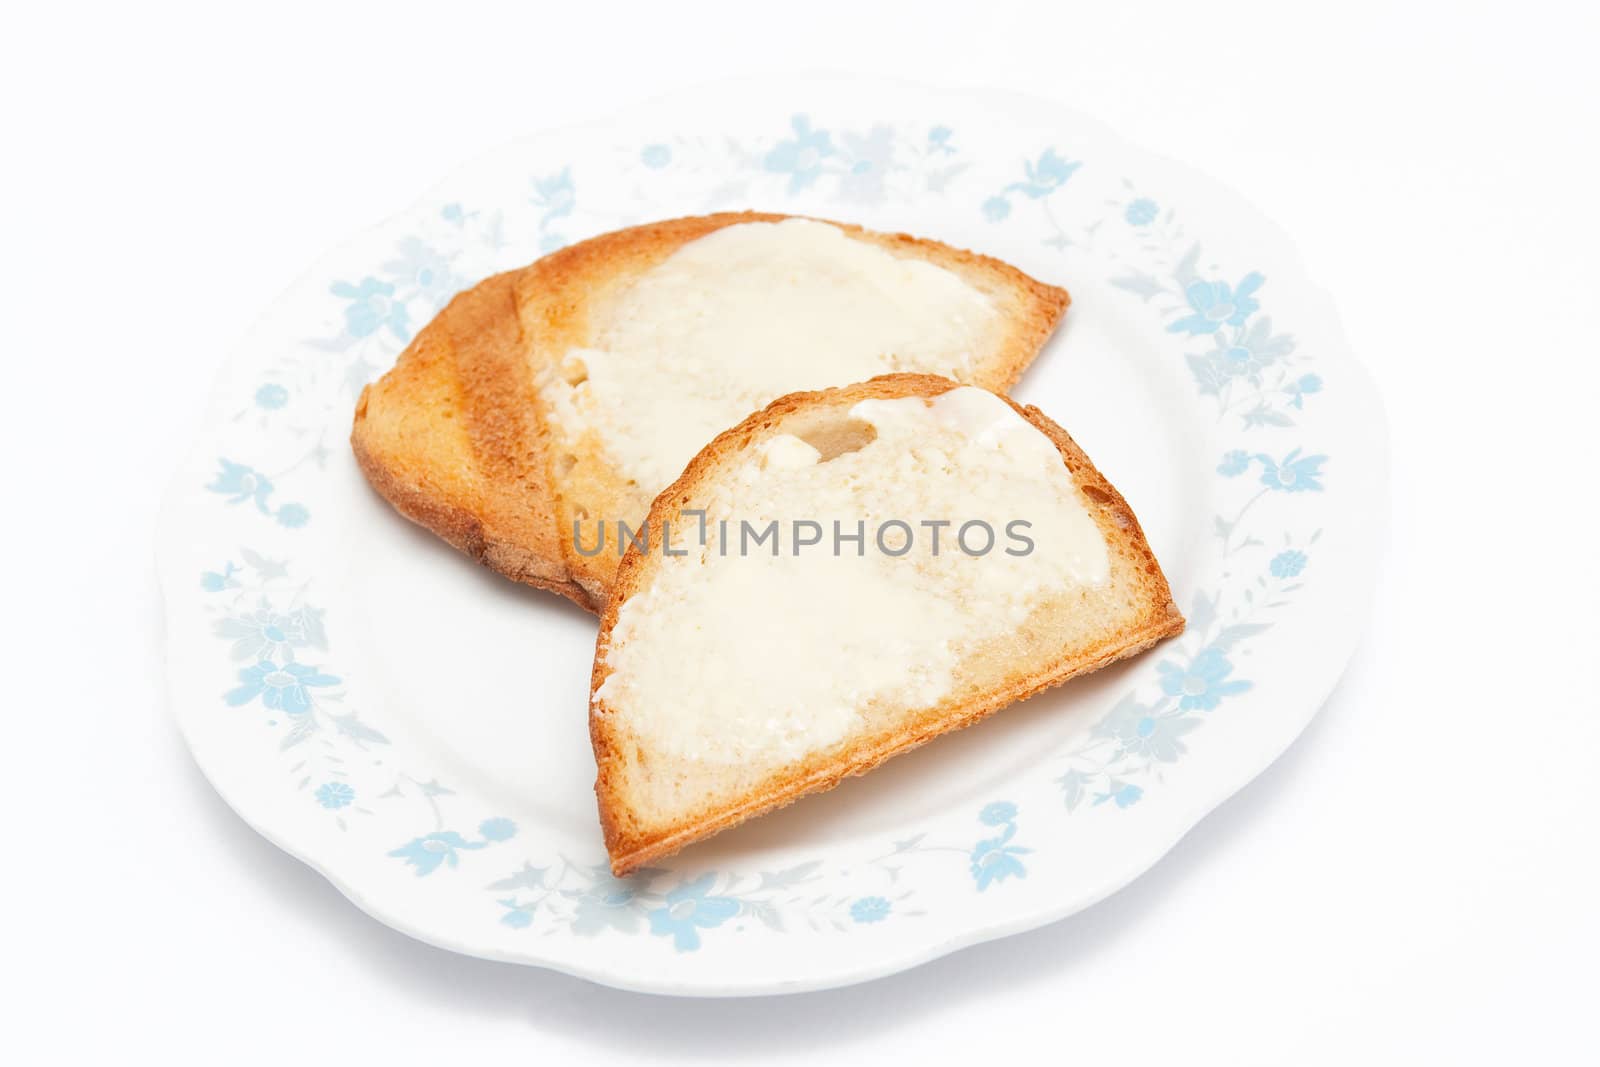 Two toasts on the plate